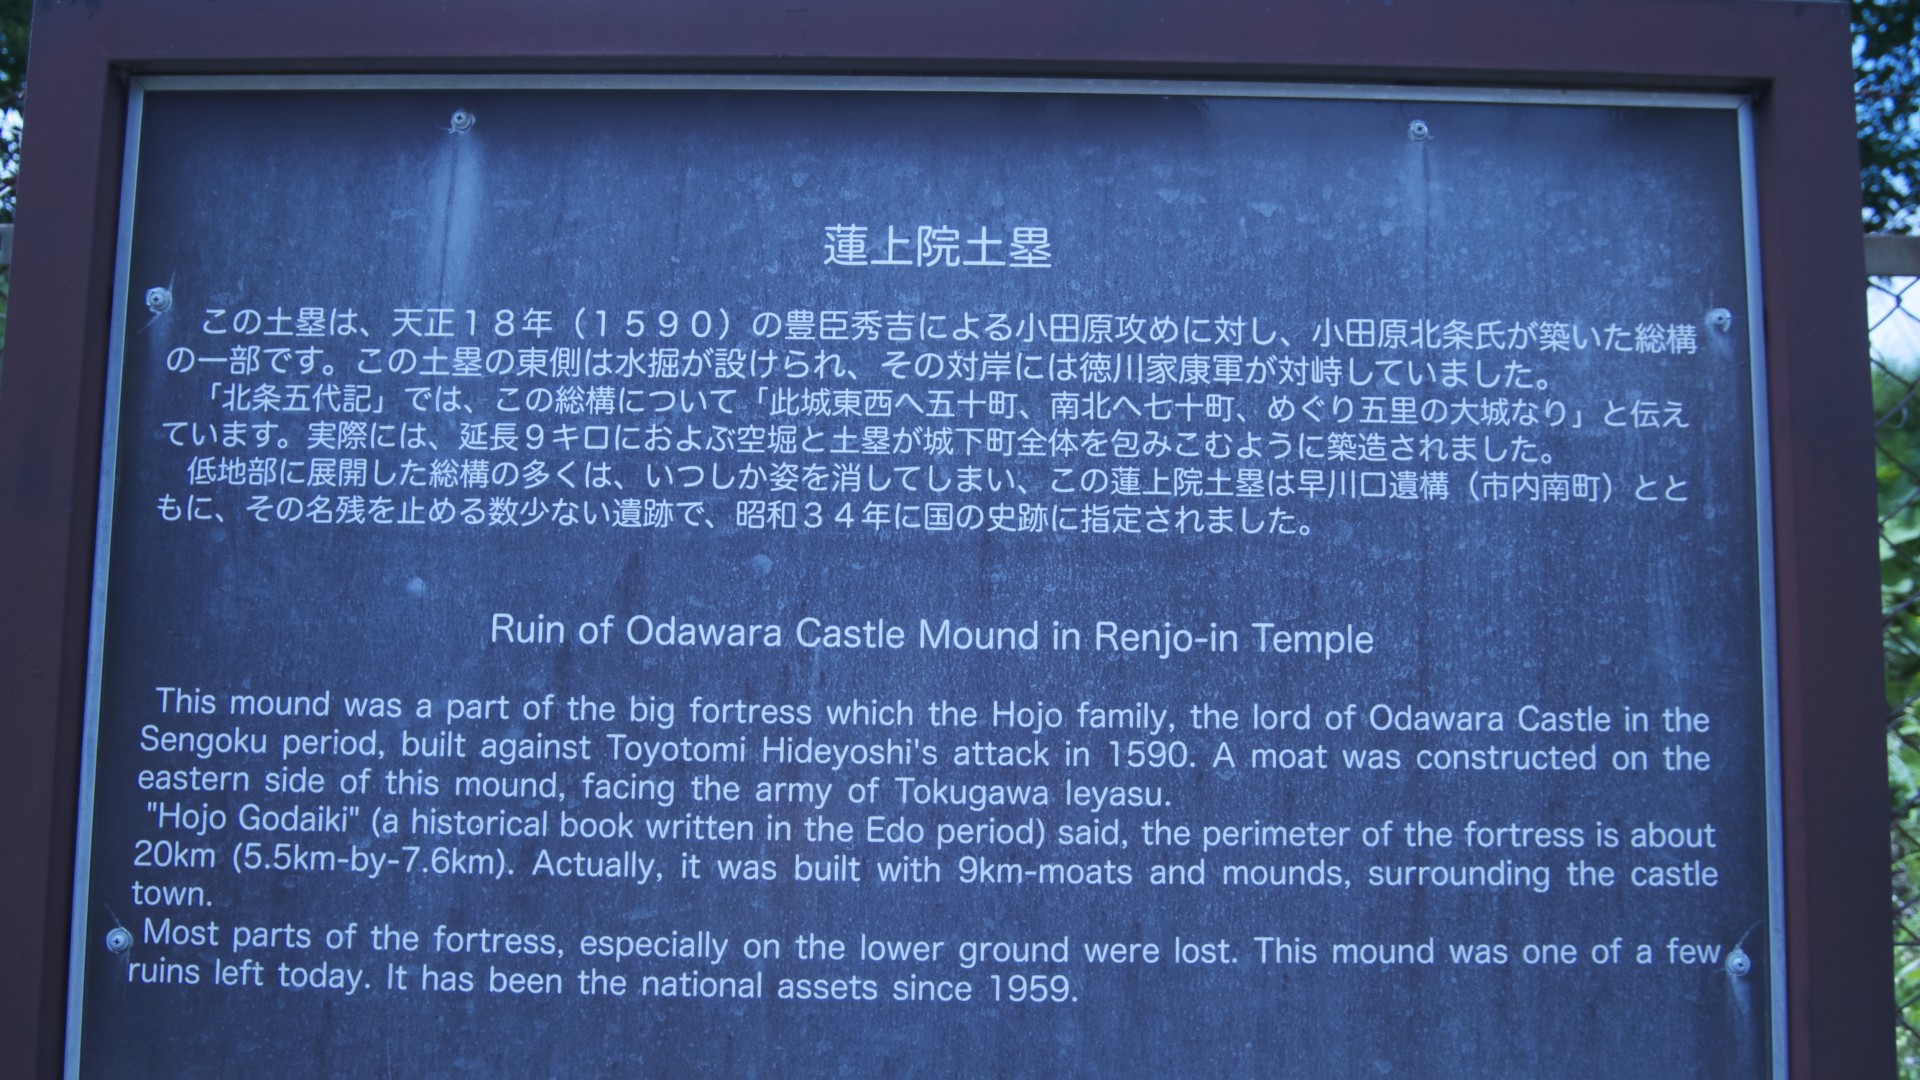 Mounds of Renjou-in